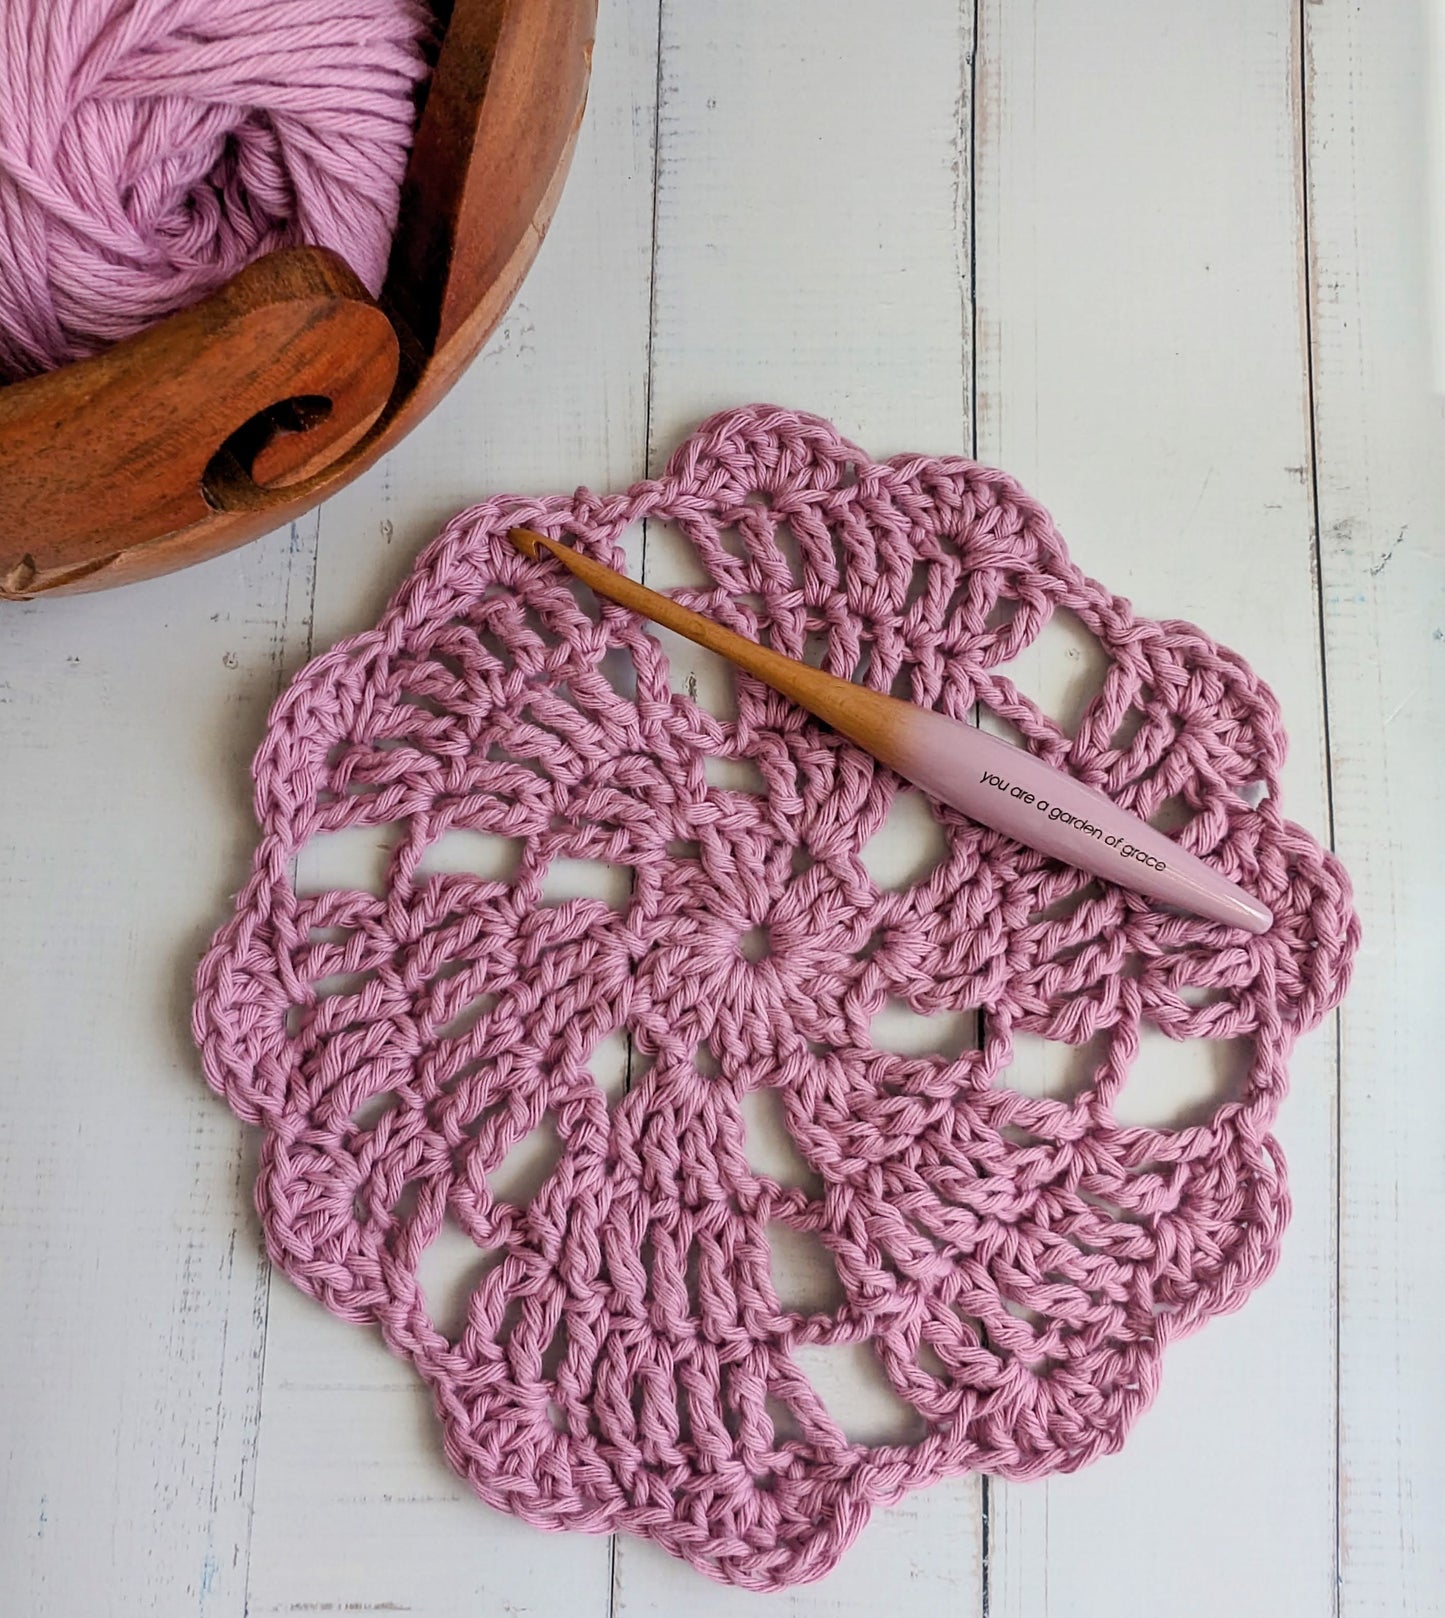 Limited Edition Mother's Day Hello Doily Beginner Crochet Kit